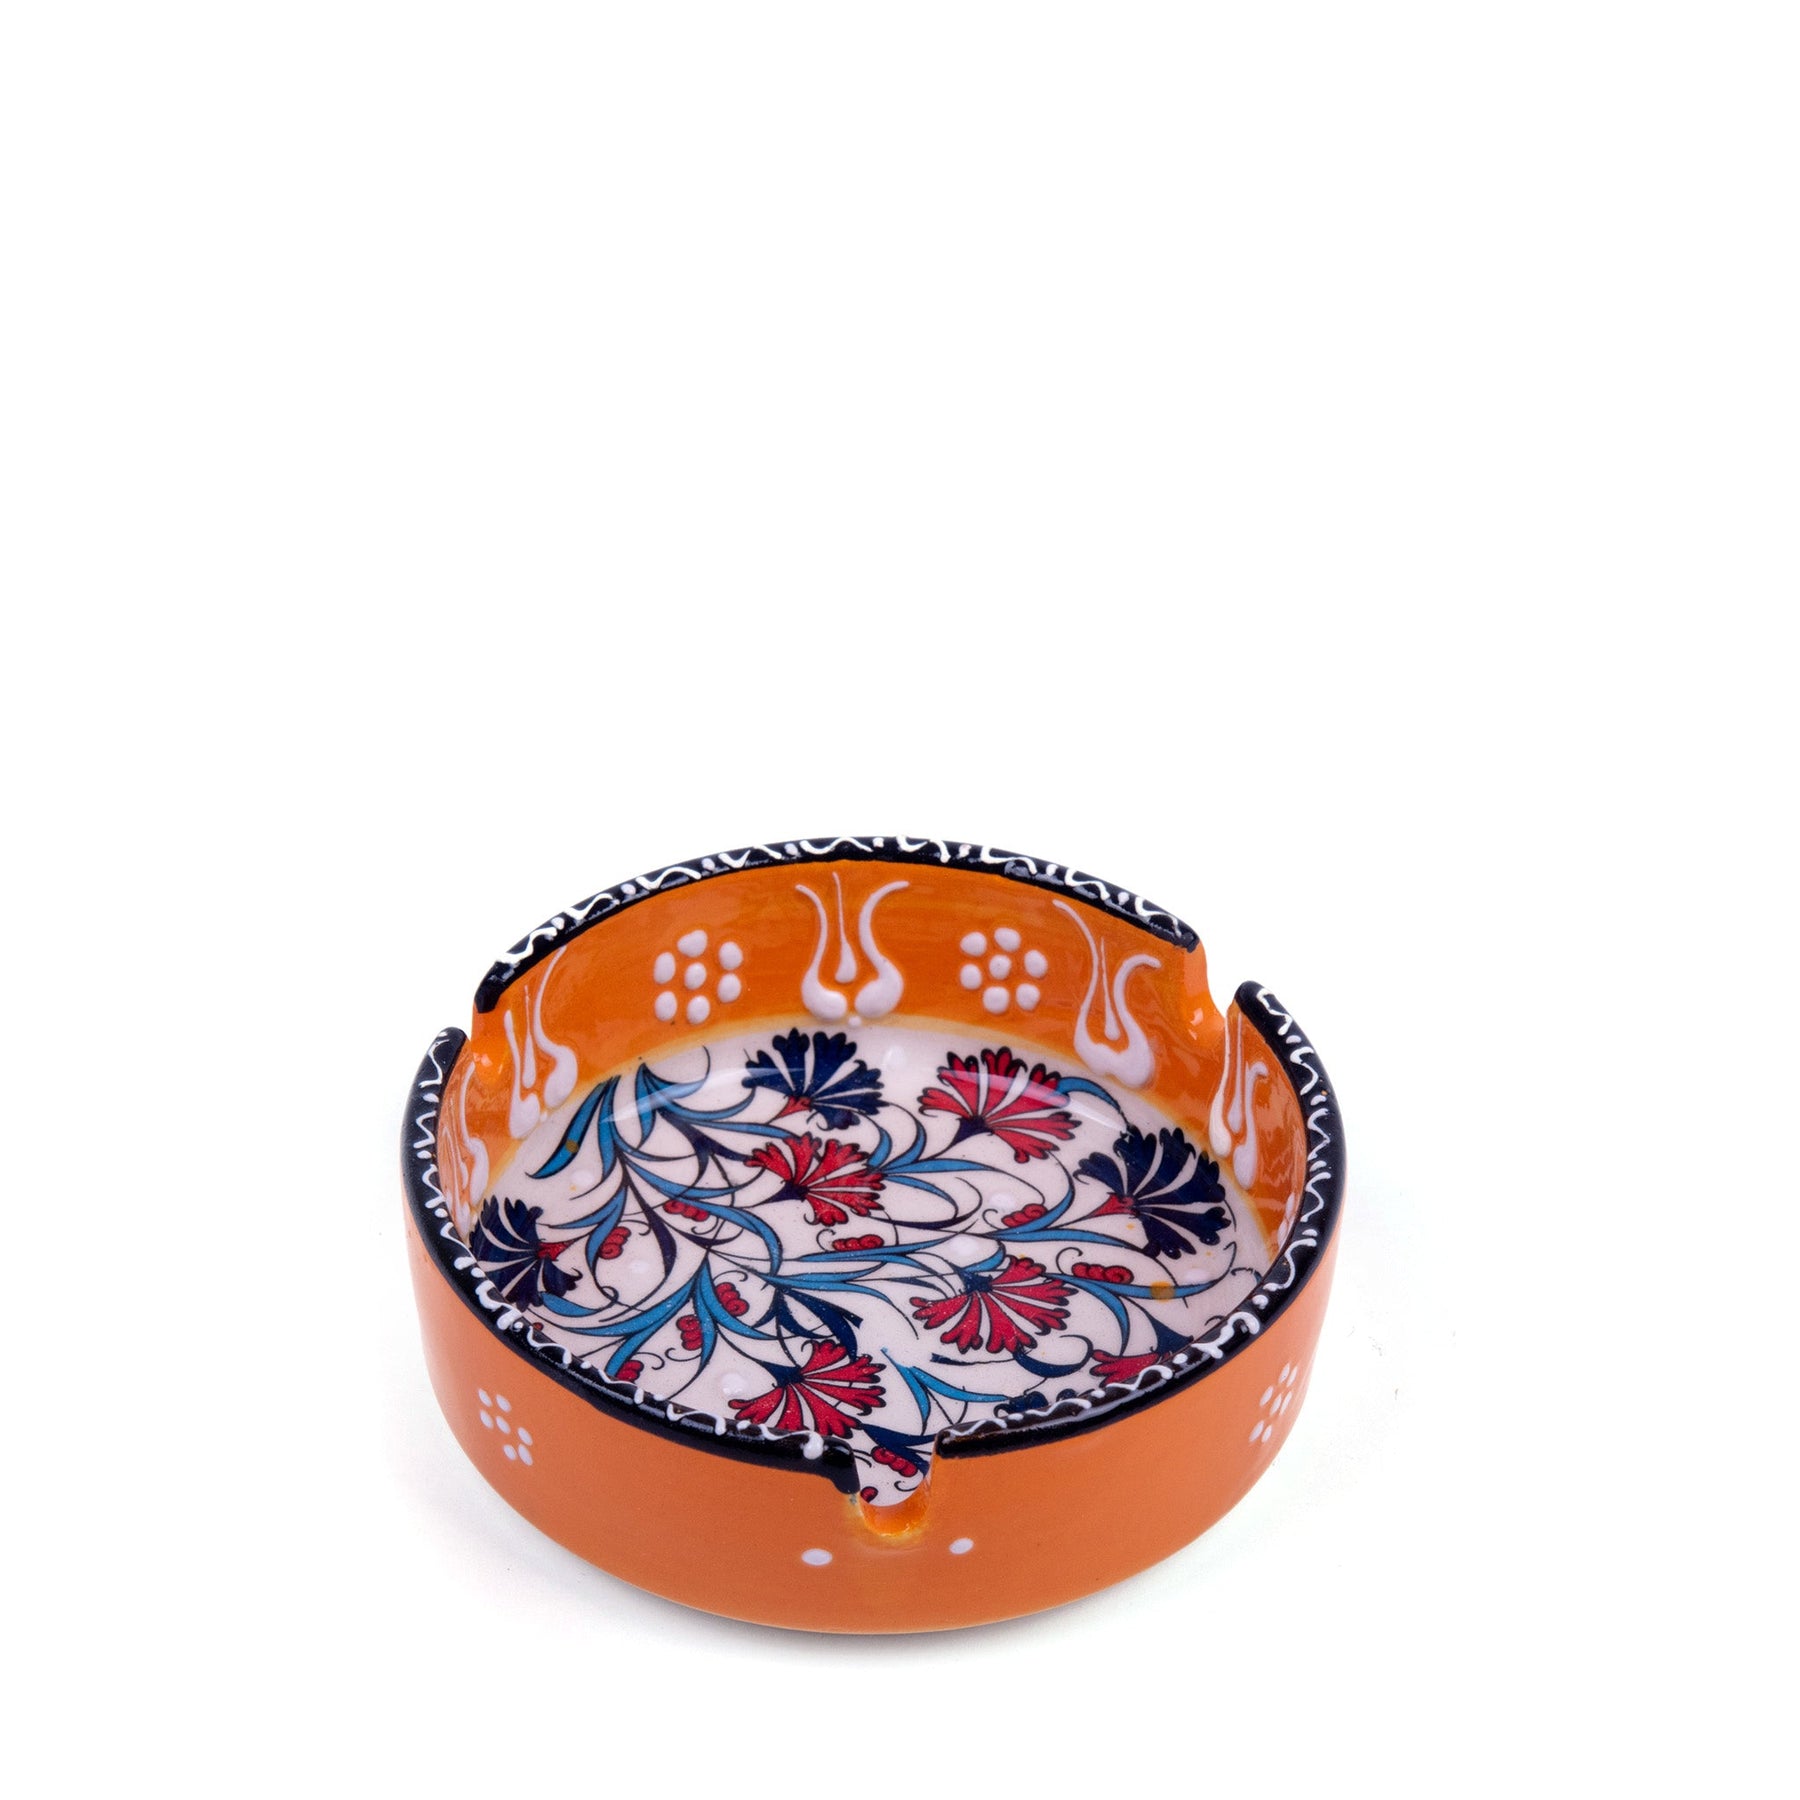 Hand Painted Turkish Ceramic Ashtray Assorted Colors 1 Count 3